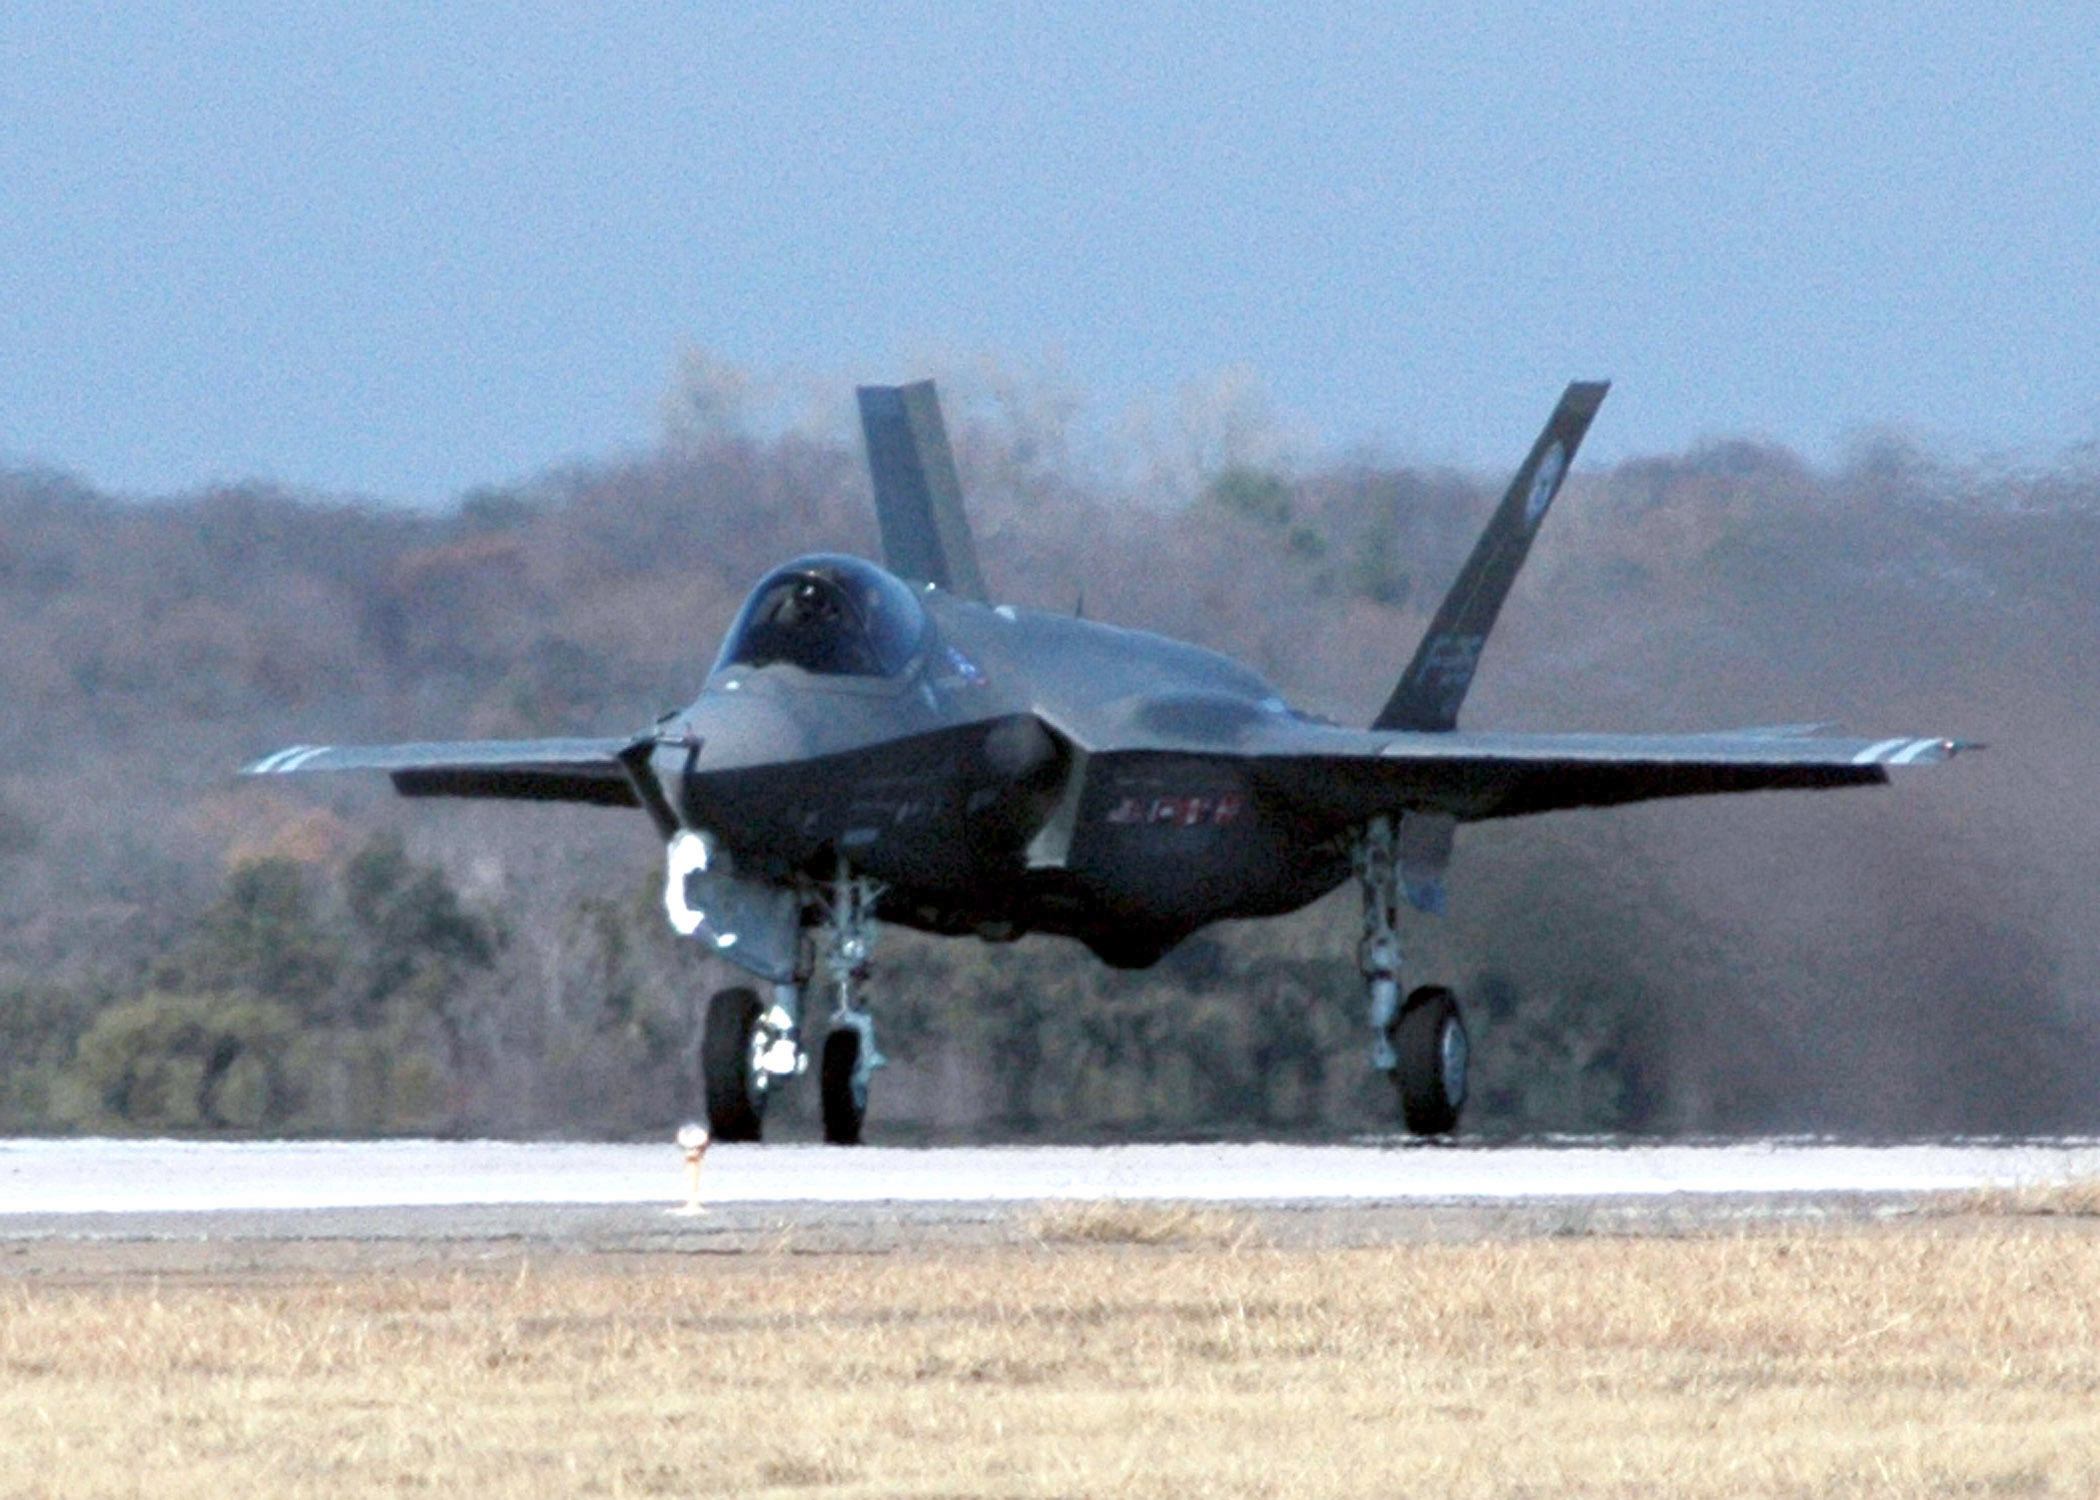 The F-35 Joint Strike Fighter (JSF) Lightning II, built by Lockheed Martin, takes off for its first flight on Joint Reserve Base Fort Worth, Texas, Dec. 15, 2006, during a test of the aircraft's initial capability. The U.S. Defense Department and eight o ther allied countries have contracted Lockheed Martin as part of the JSF program, which was designed to maximize efficiency and minimize the life cycle, costs of a future multi-role fighter jet. (U.S. Navy photo by Mass Communication Specialist 2nd Class  D. Keith Simmons) (Released)